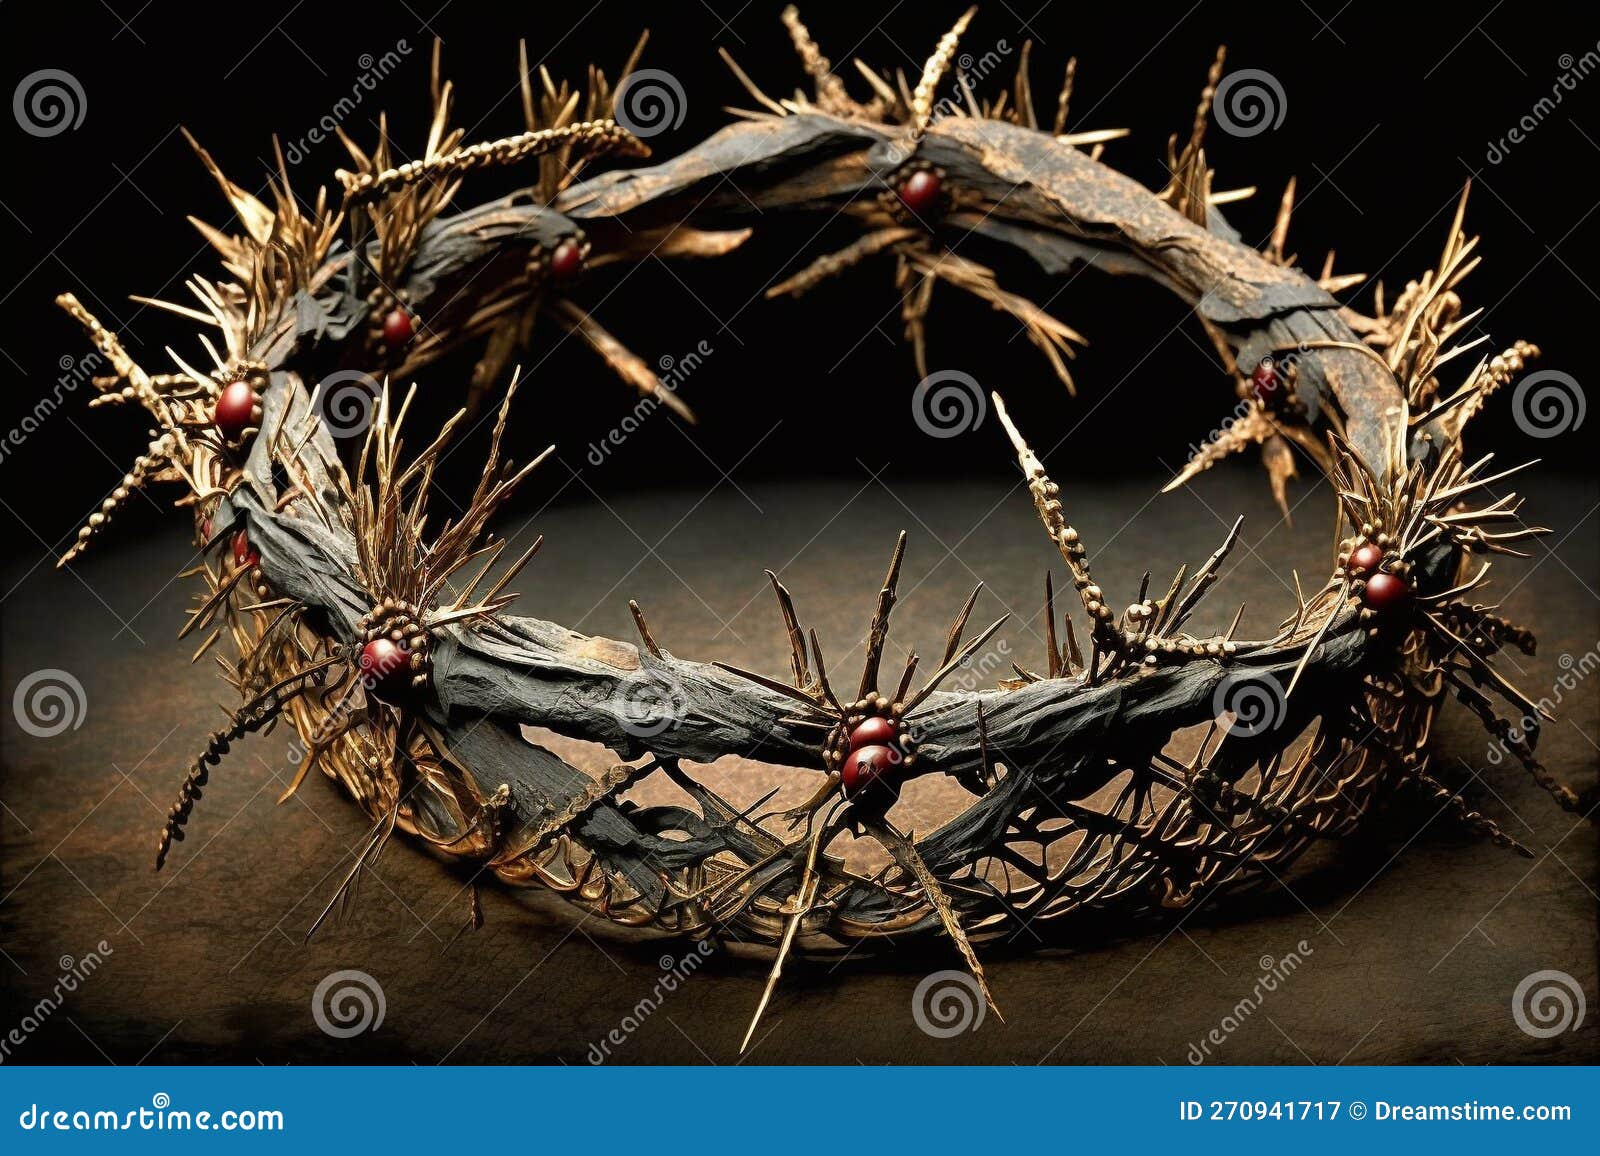 Images of Easter: The Crown of Thorns